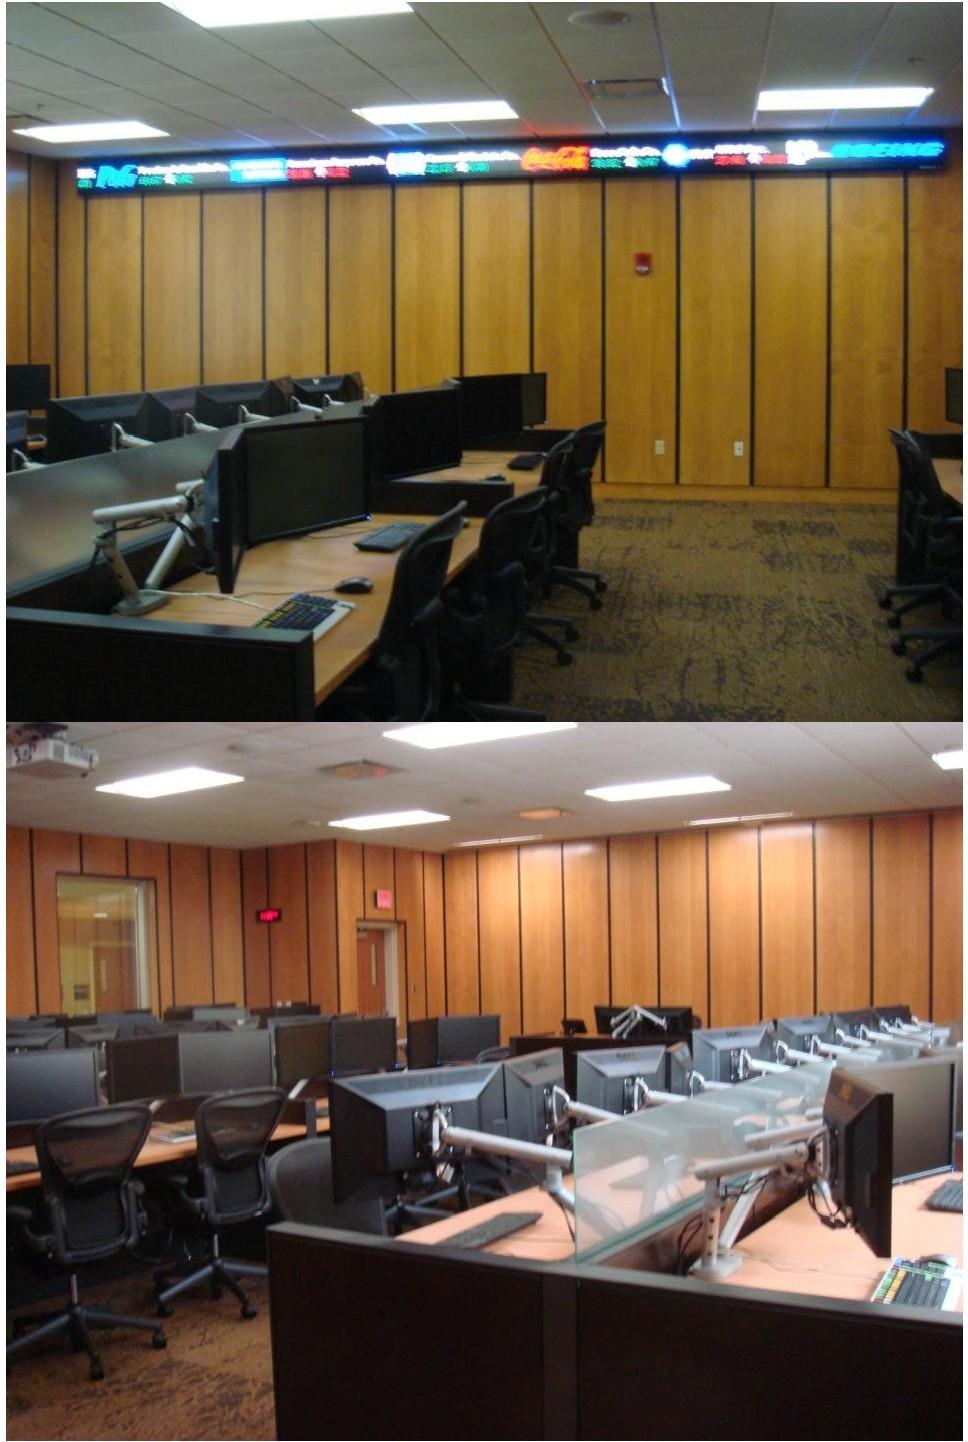 Below are pictures of the Trading Room as completed.